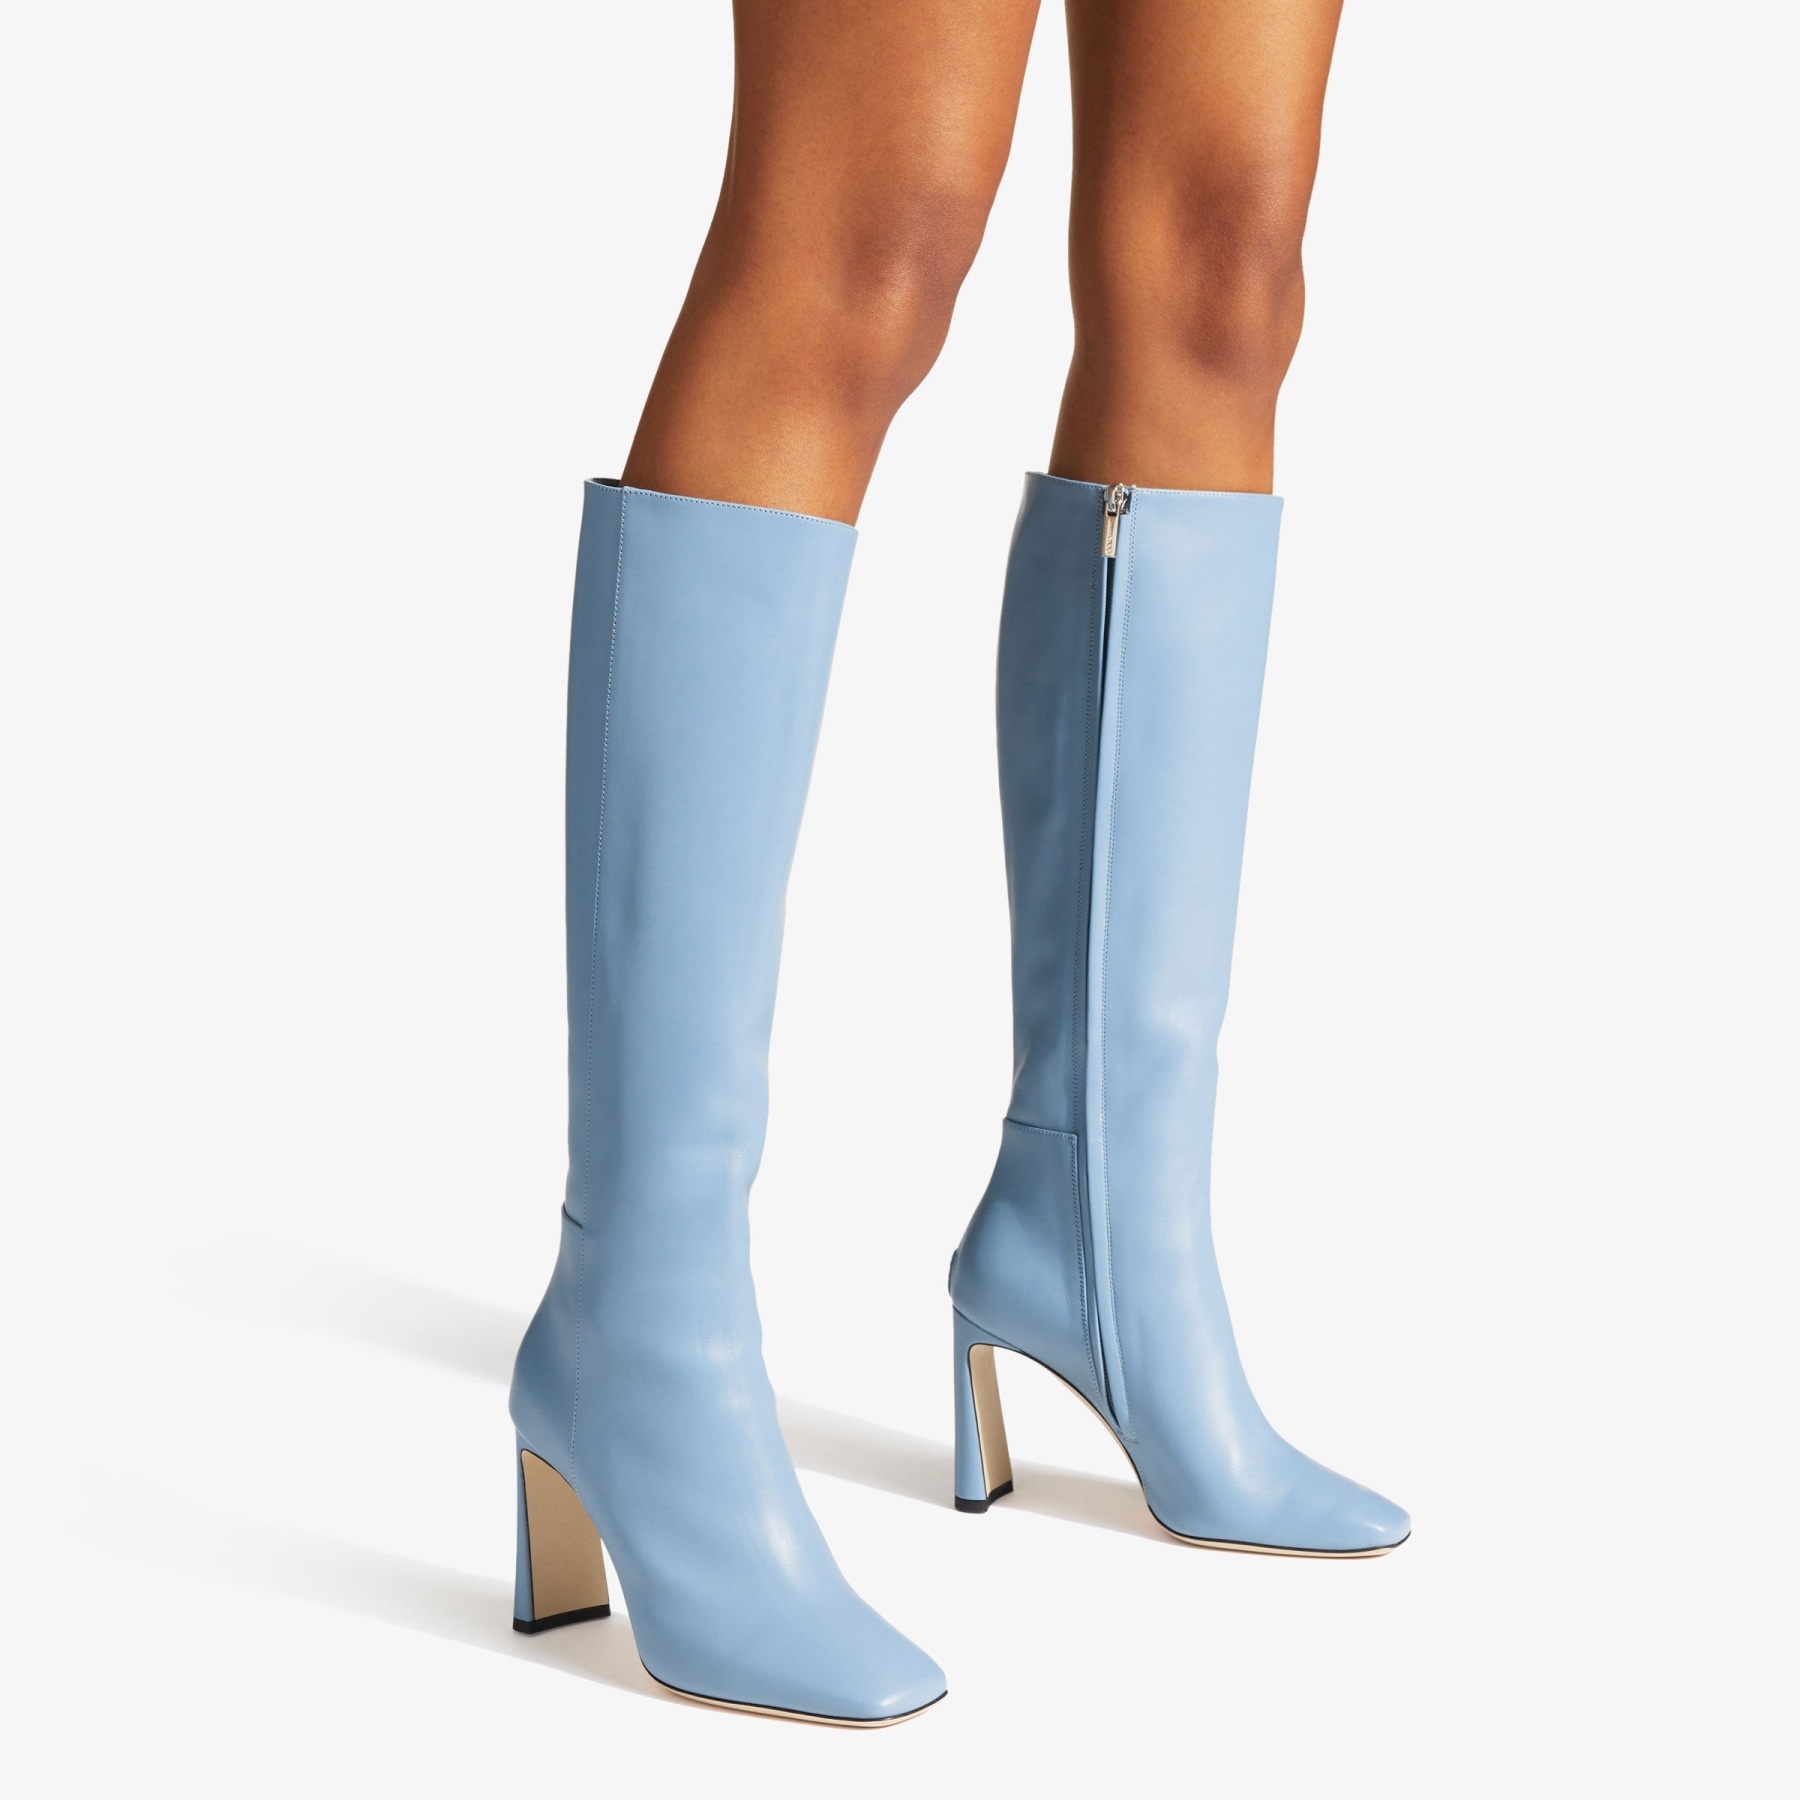 Kinsey 95
Smoky Blue Calf Leather Knee-High Boots - 2